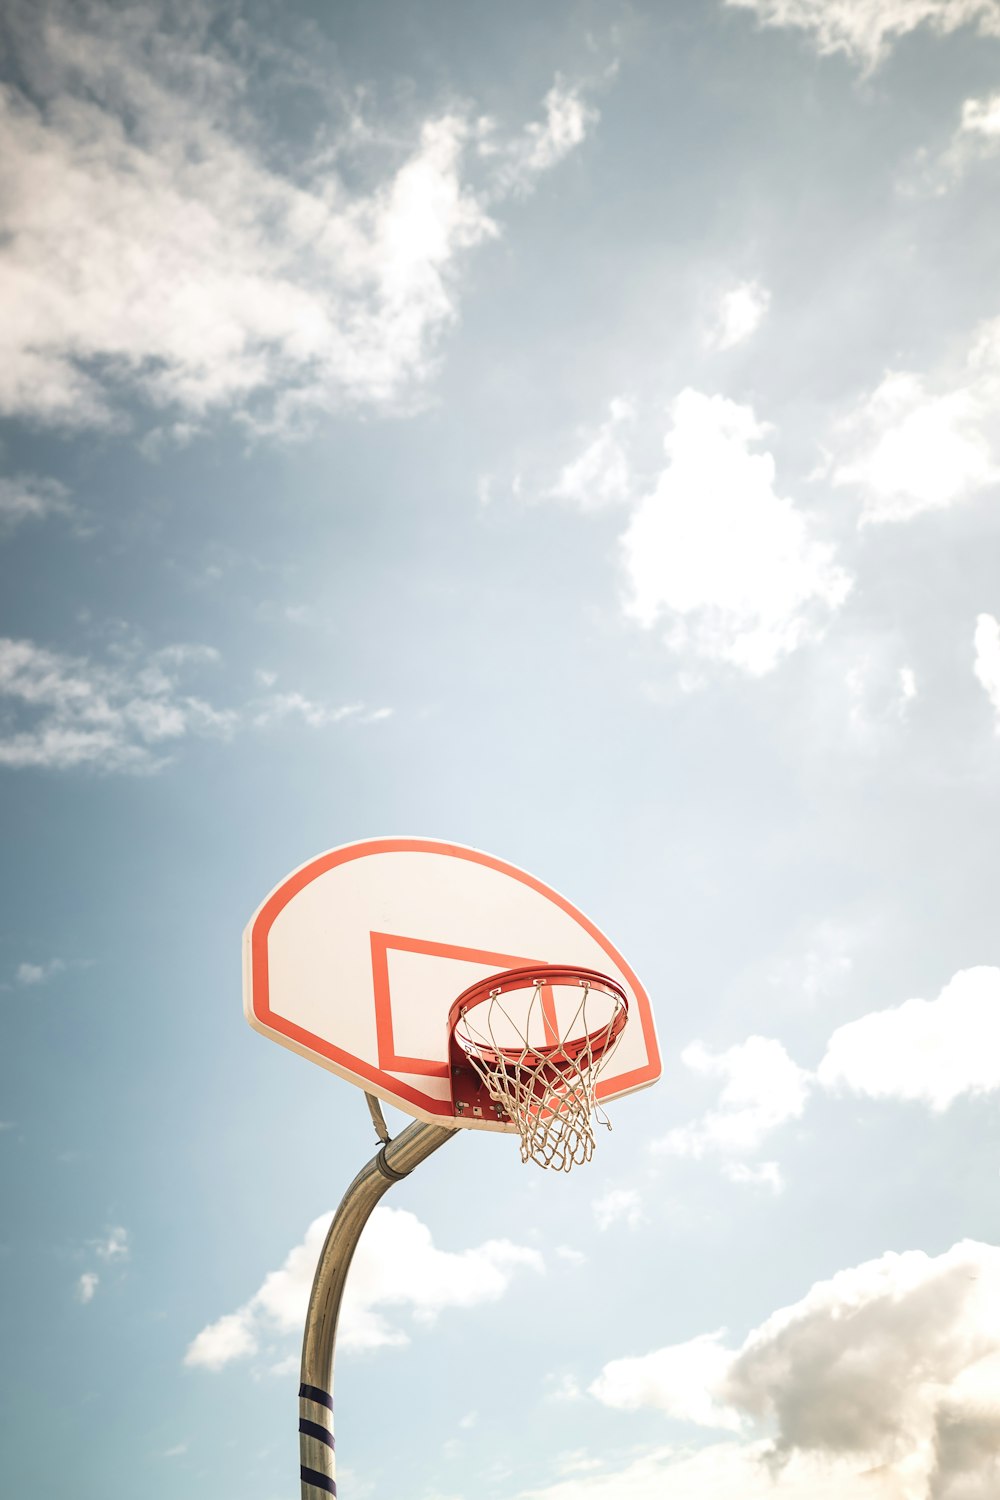 basketball hoop under blue sky and white clouds during daytime